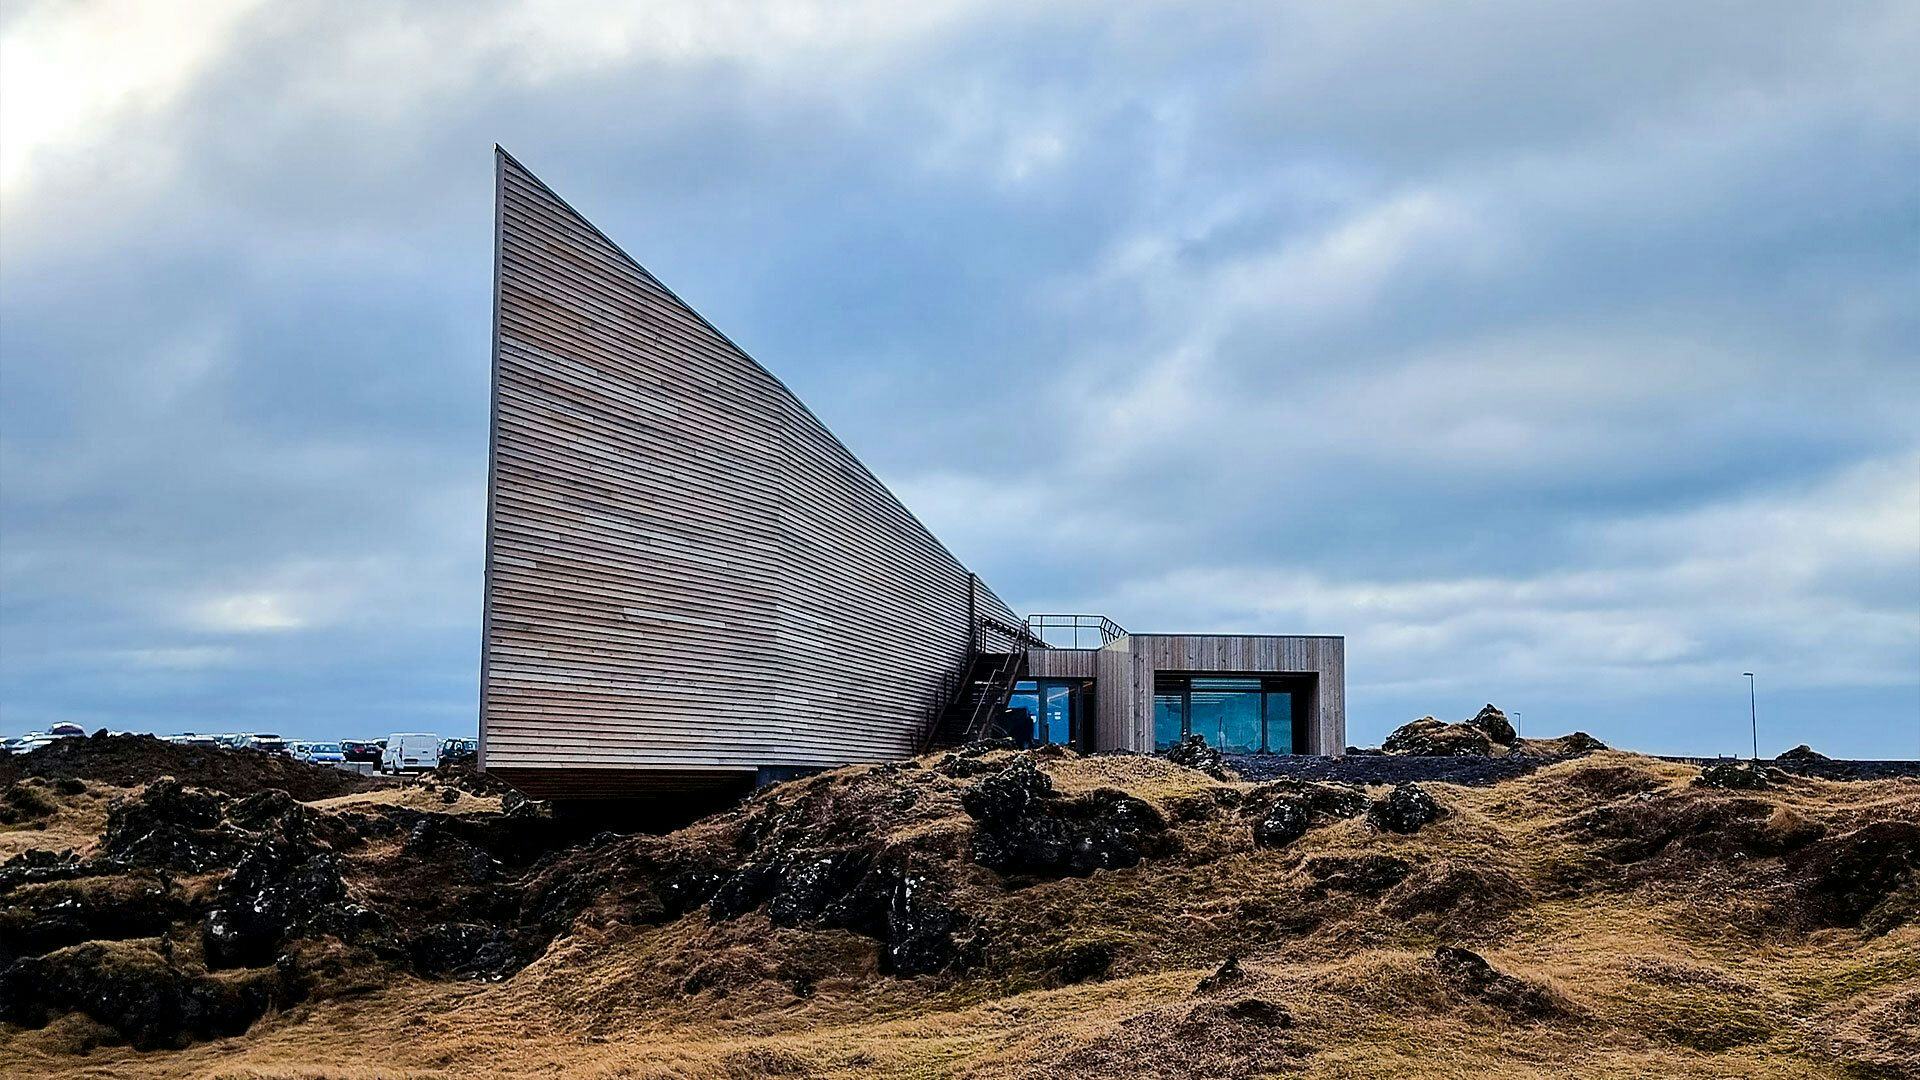 A modern building with unique angled facade, set in rugged landscape with moss covered rocks